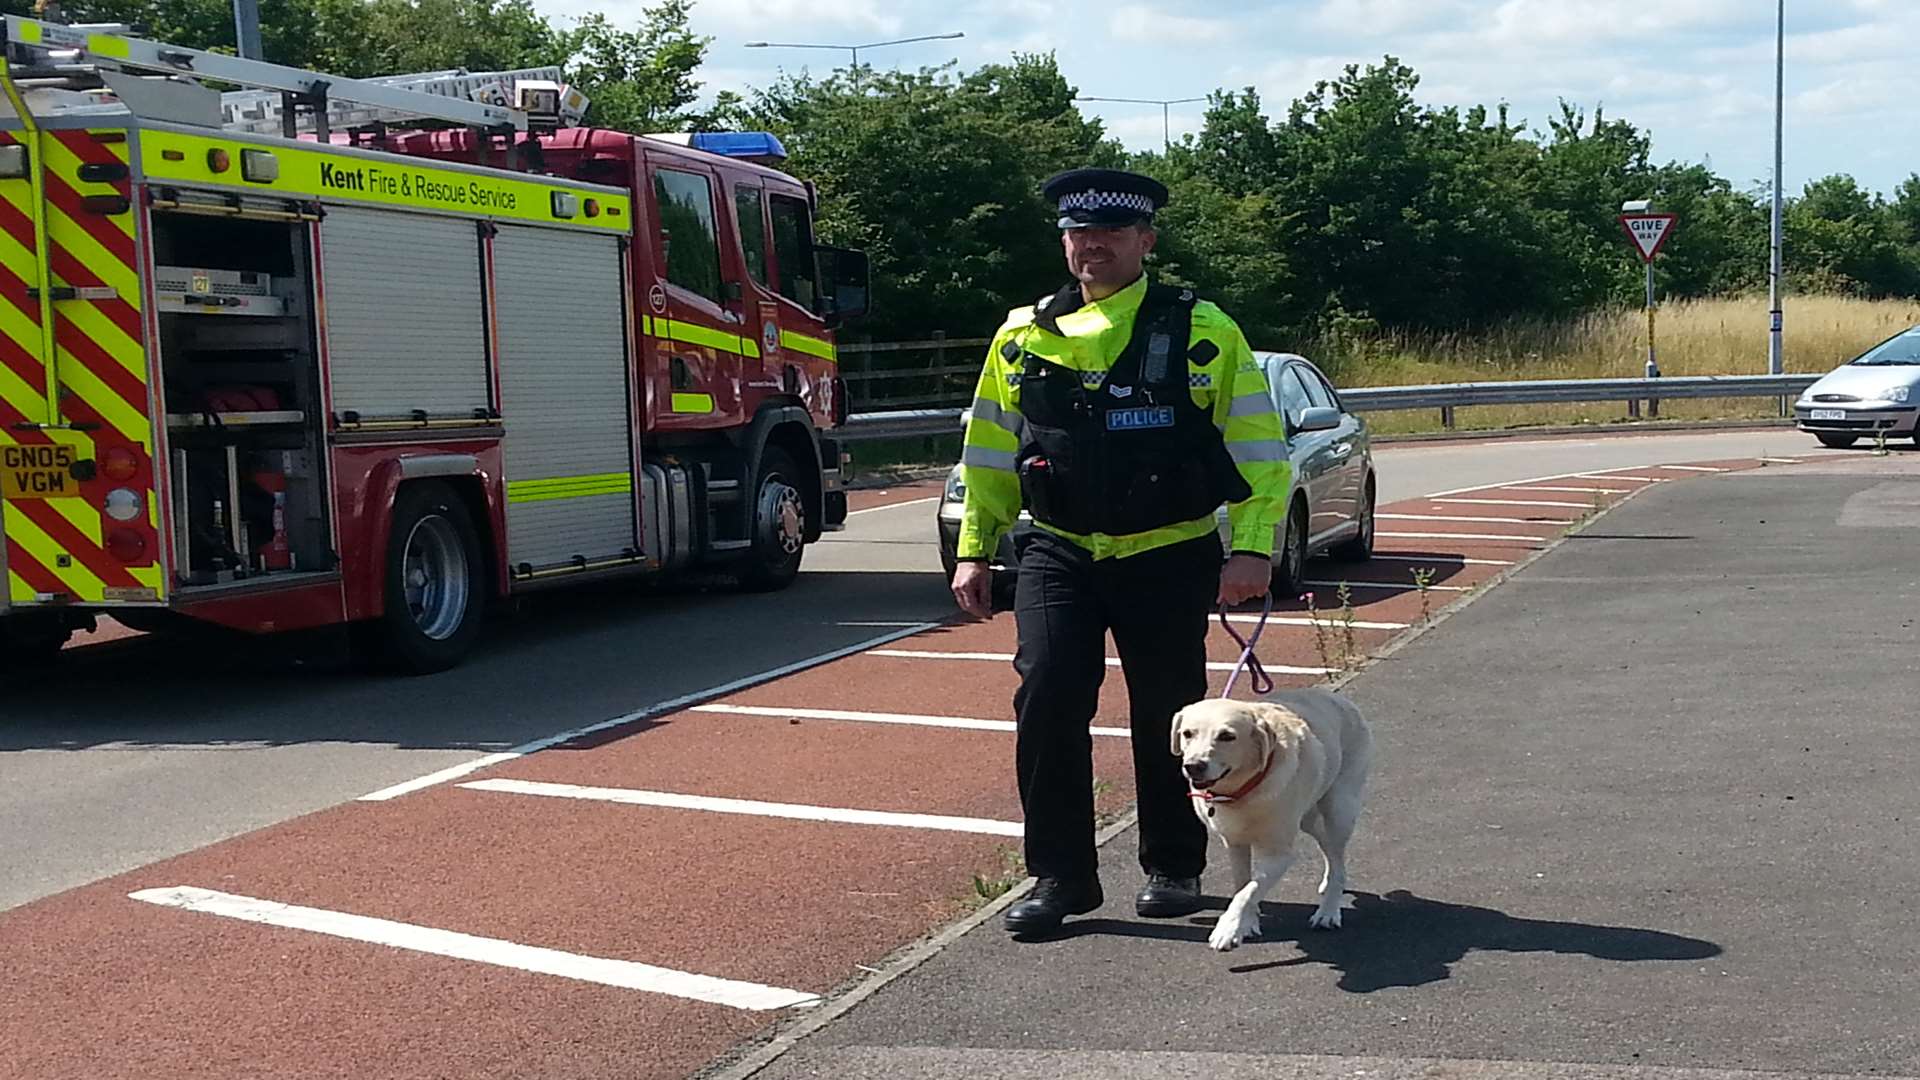 A Labrador from the Range Rover being walked by police